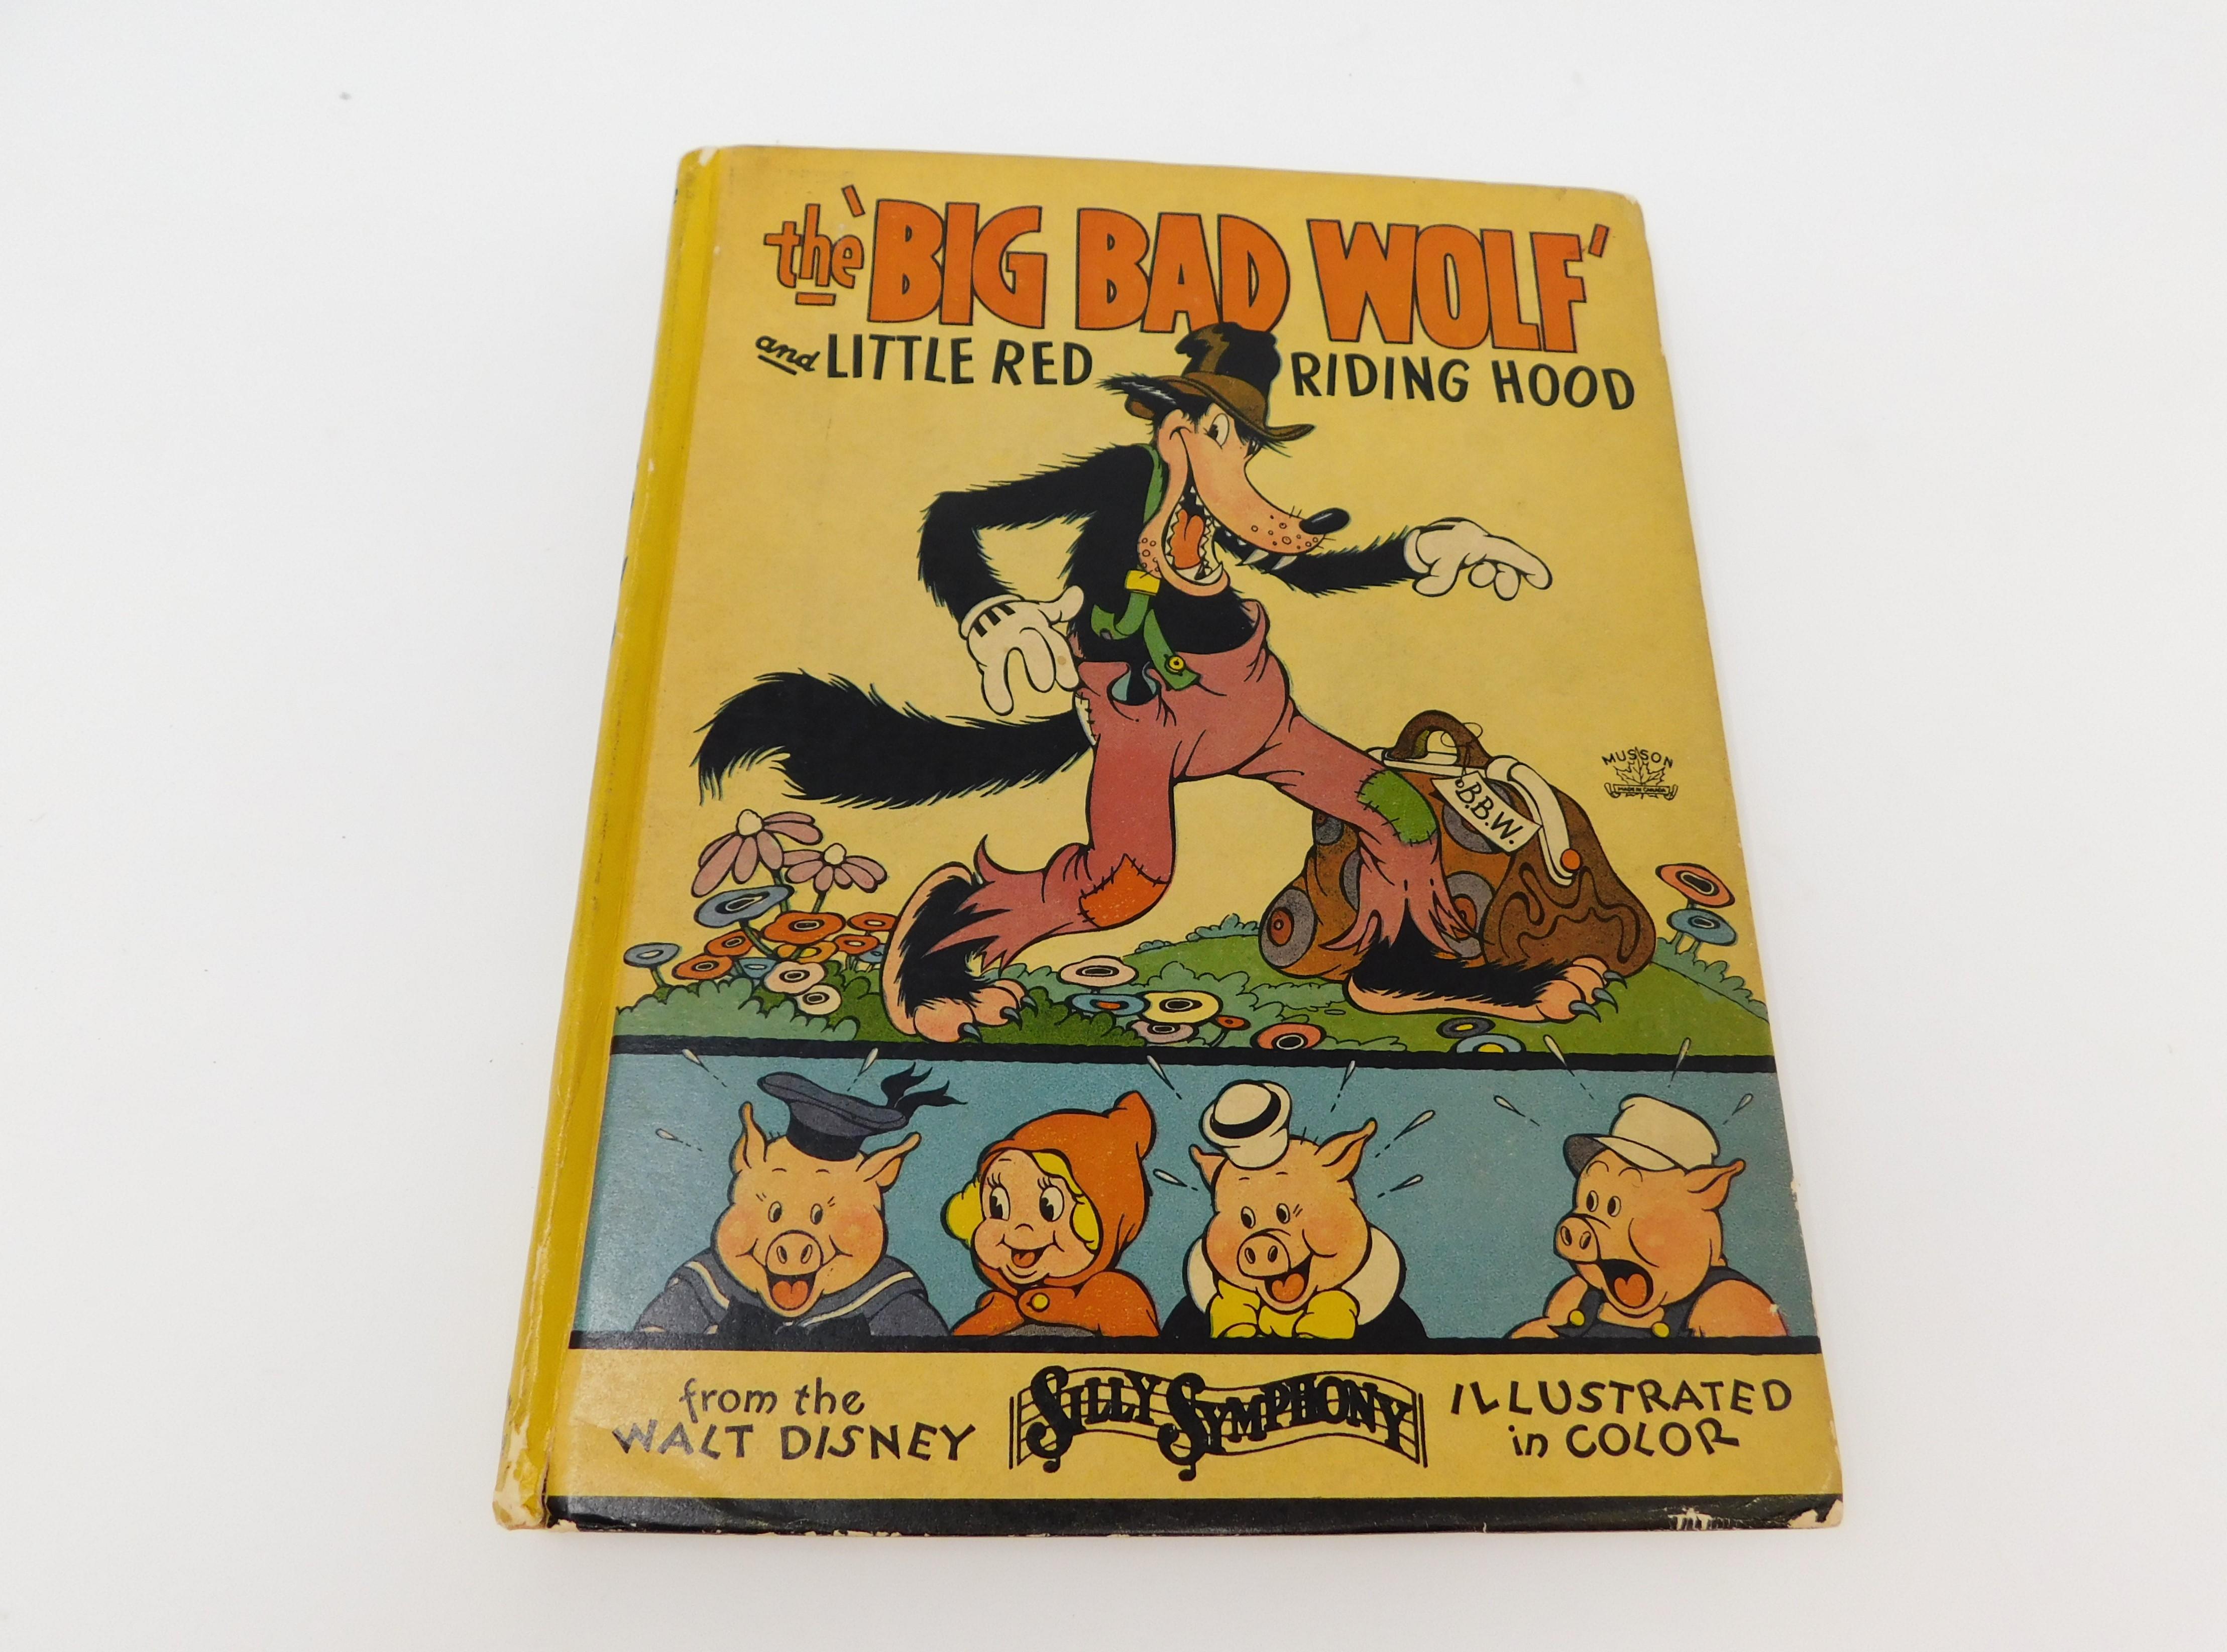 Vintage 1934 Walt Disney S The Big Bad Wolf And Little Red Riding